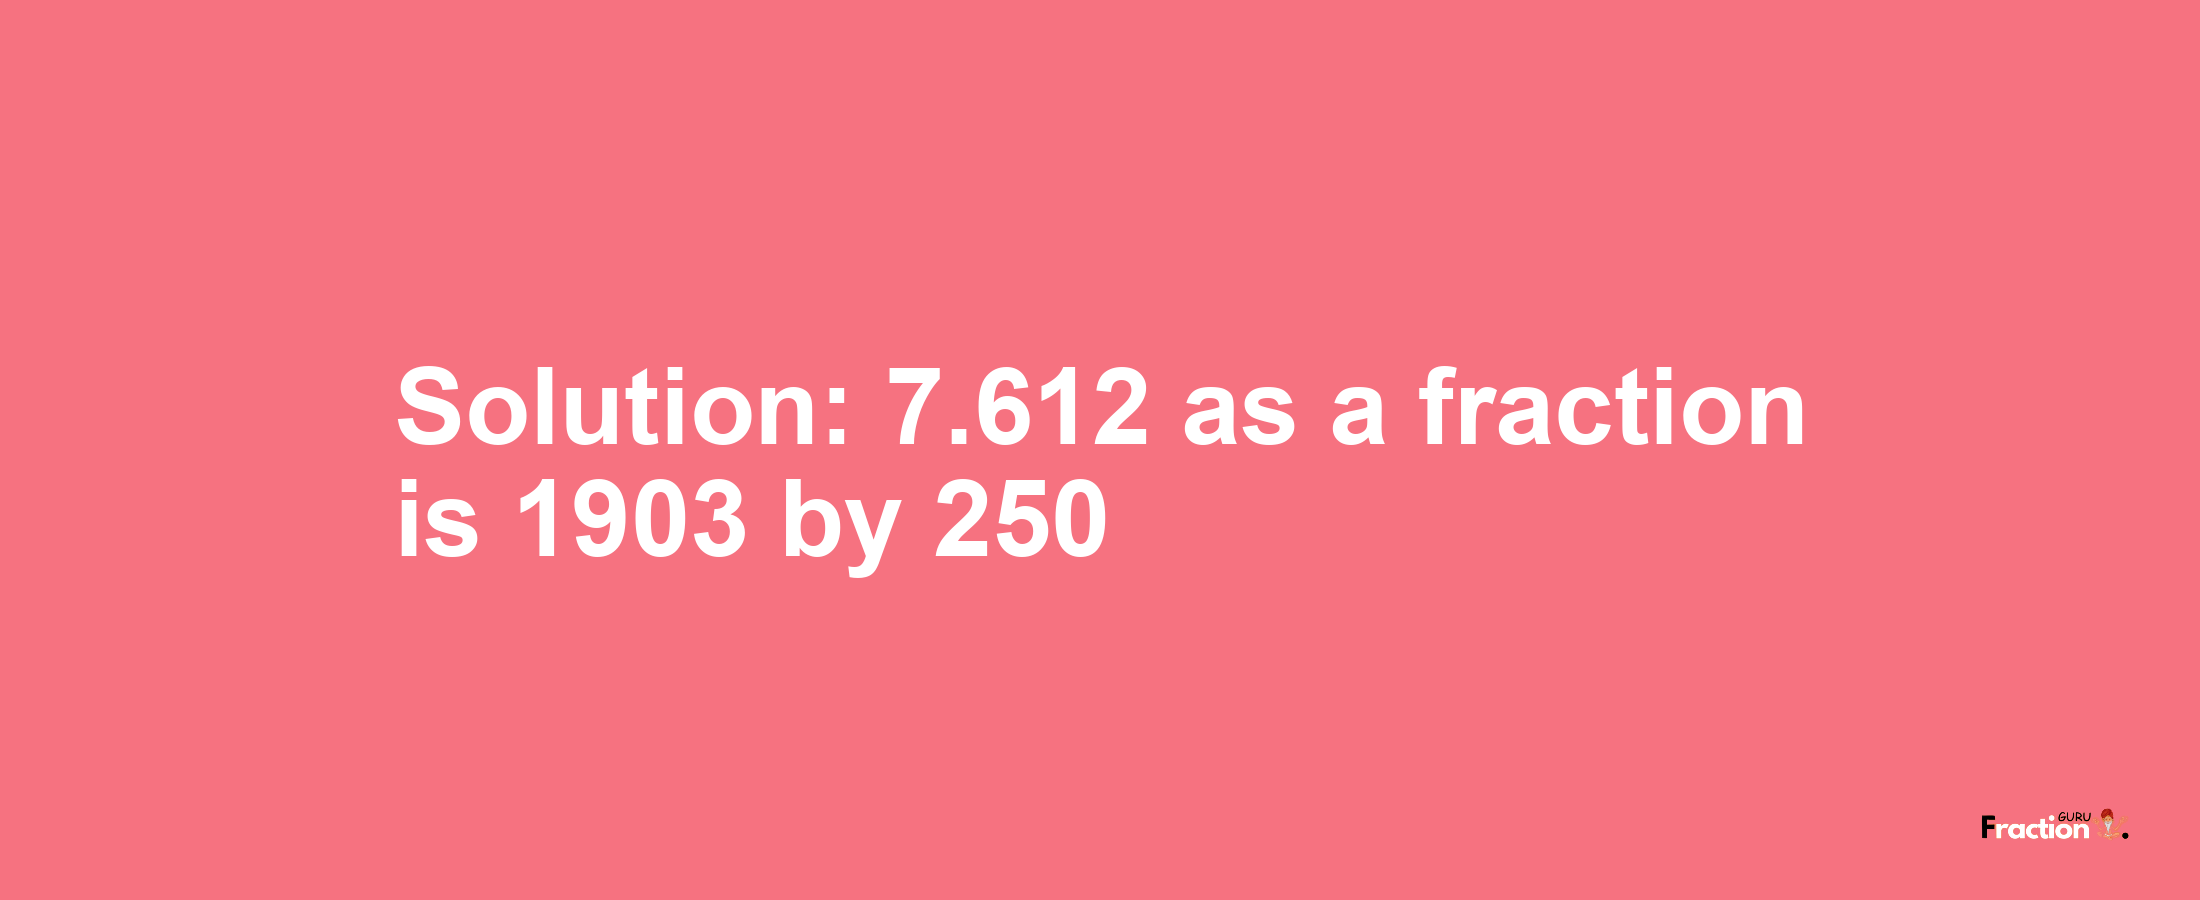 Solution:7.612 as a fraction is 1903/250